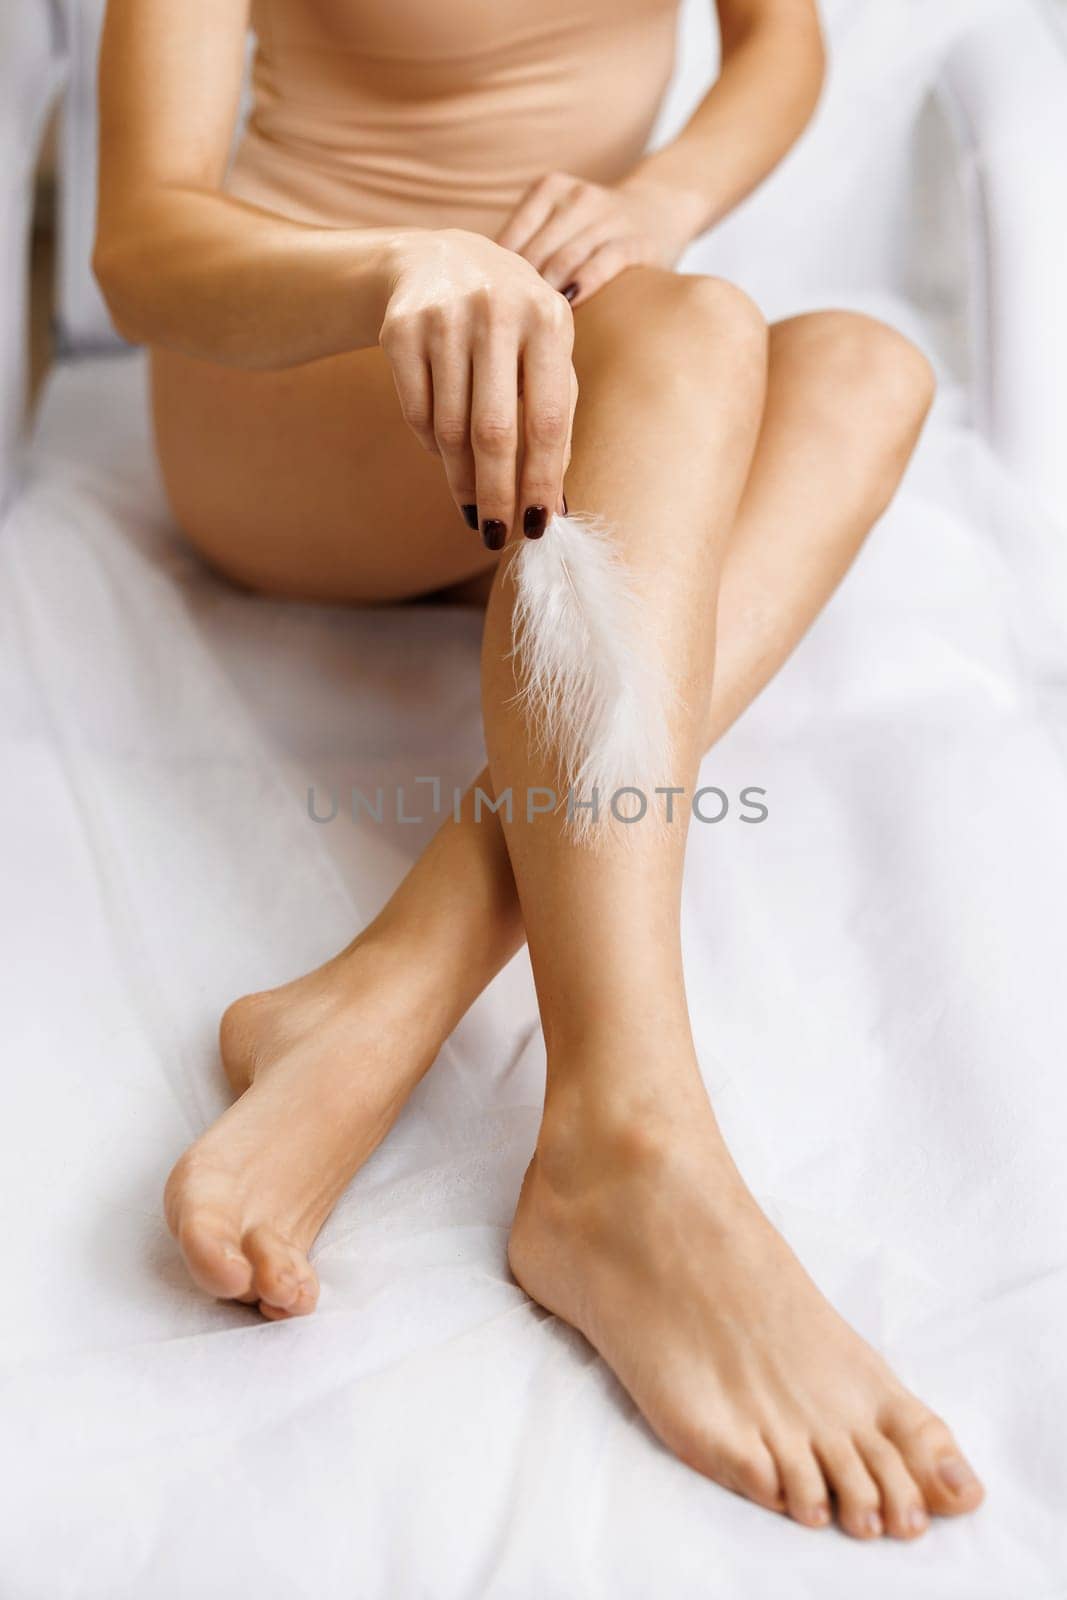 Closeup of female legs with smooth skin and soft ostrich feather. Concepts of skin care and hair removal treatment. Woman touches her legs with white feather by uflypro